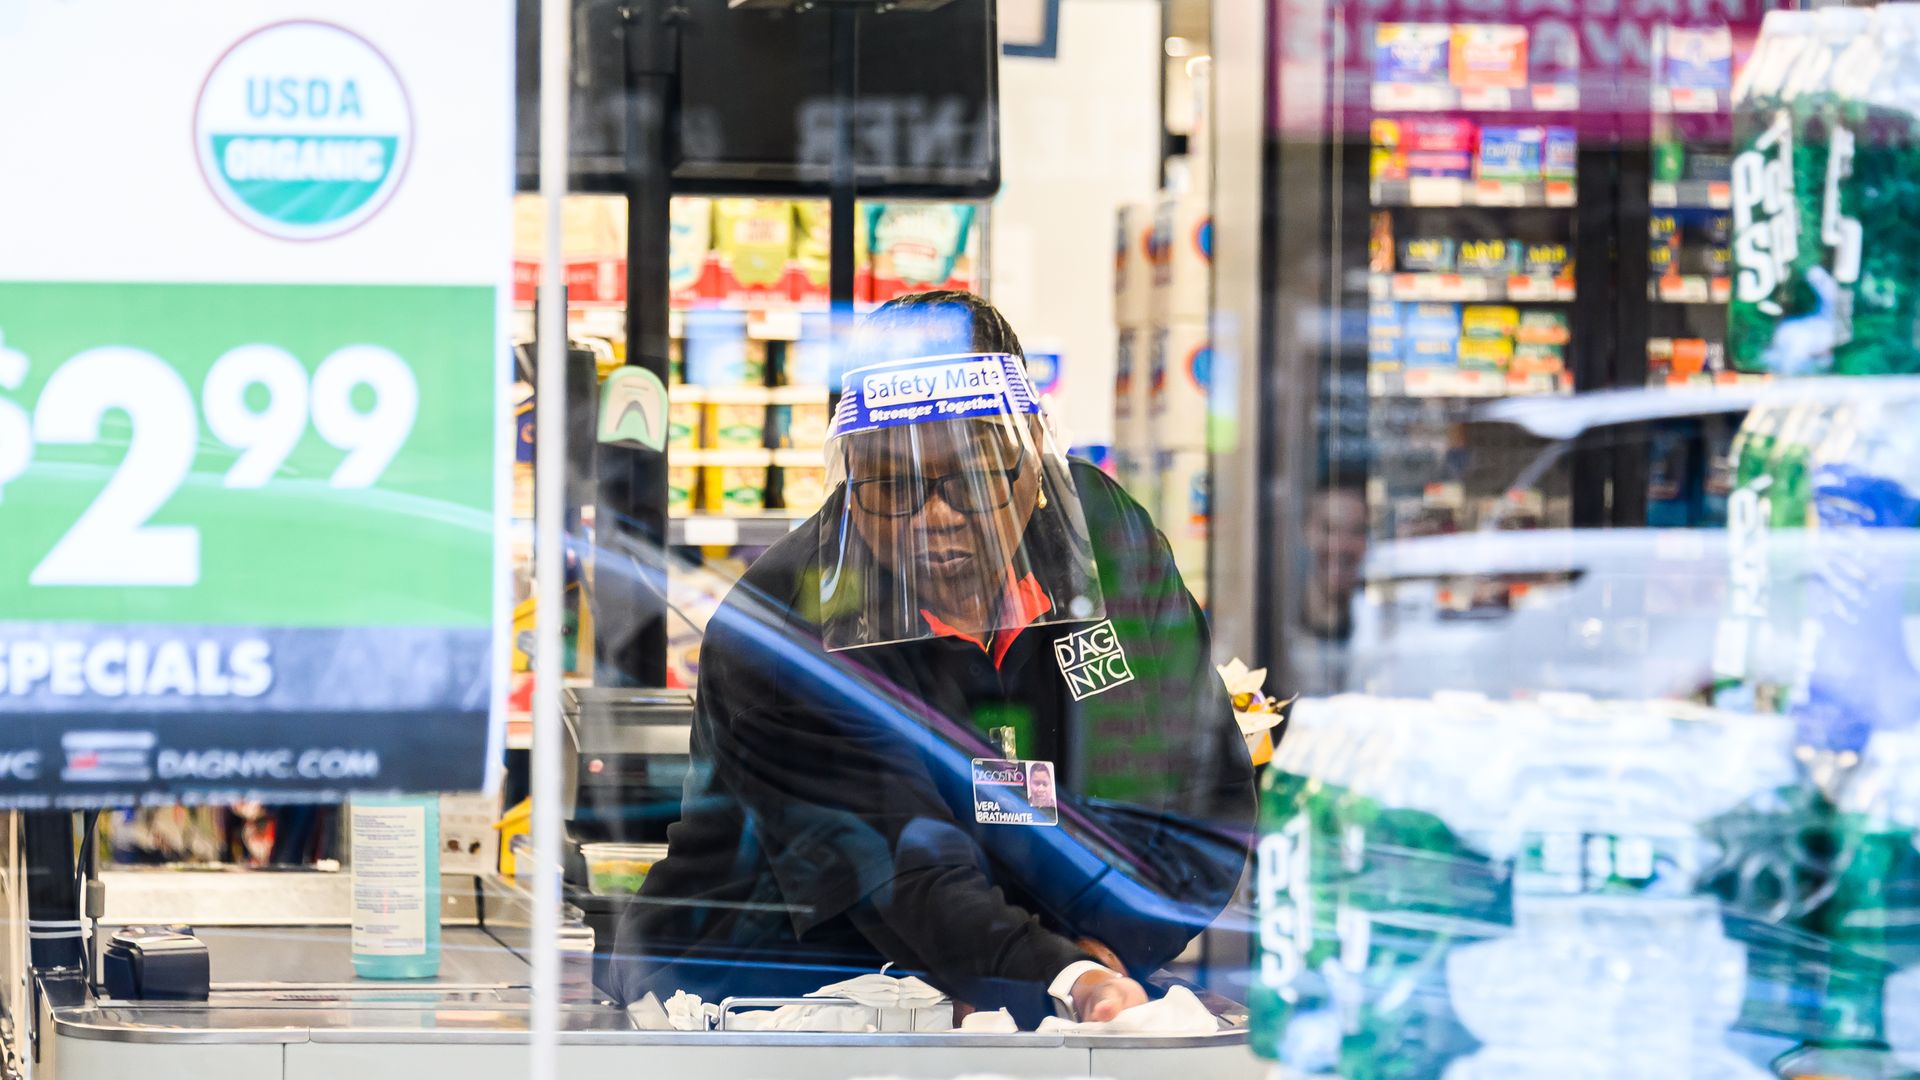 A worker wears a face mask in a D'Agostino supermarket in Murray Hill as New York City moves into Phase 2 of re-opening following restrictions imposed to curb the coronavirus pandemic on June 30, 2020